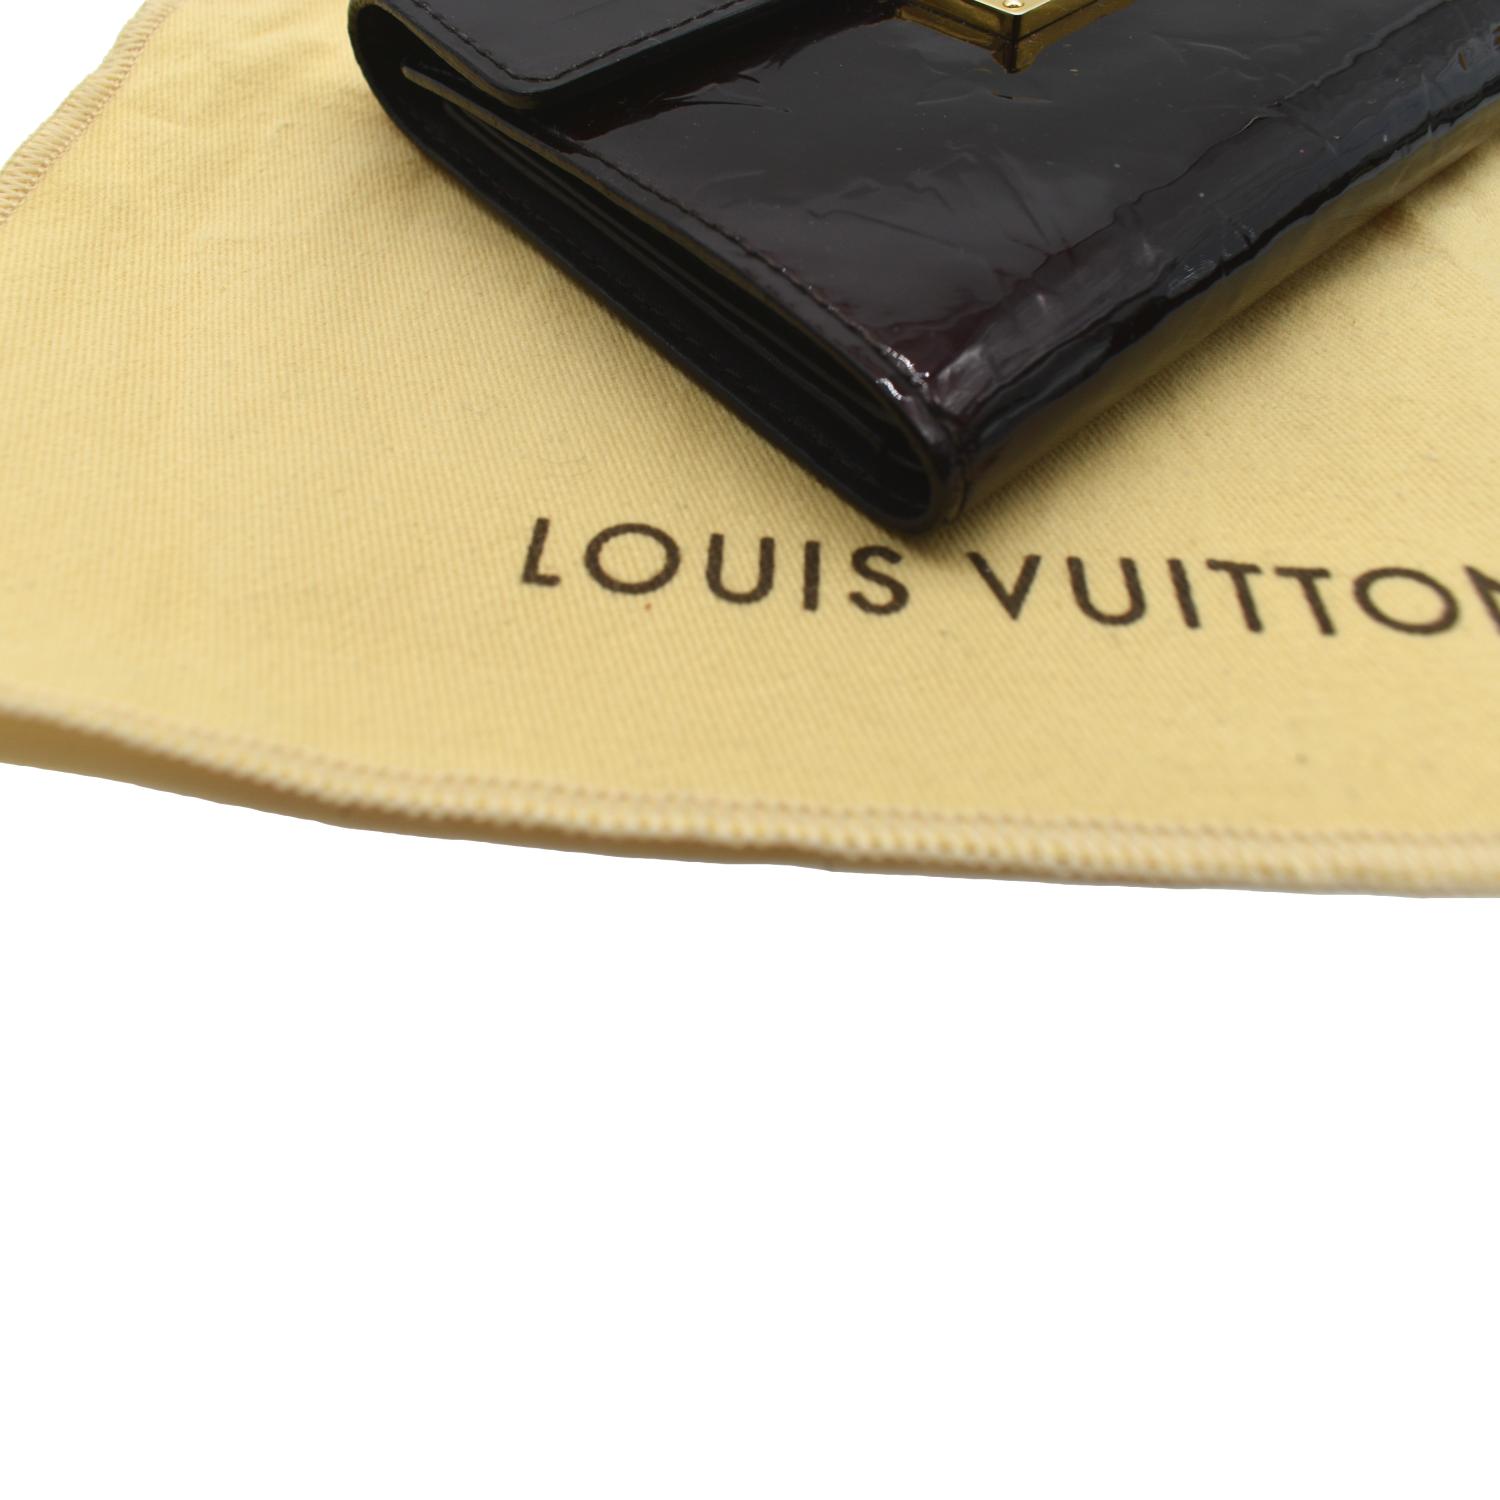 LOUIS VUITTON, Koala, wallet with monogram pattern, buckle in yellow  metal. Vintage clothing & Accessories - Auctionet